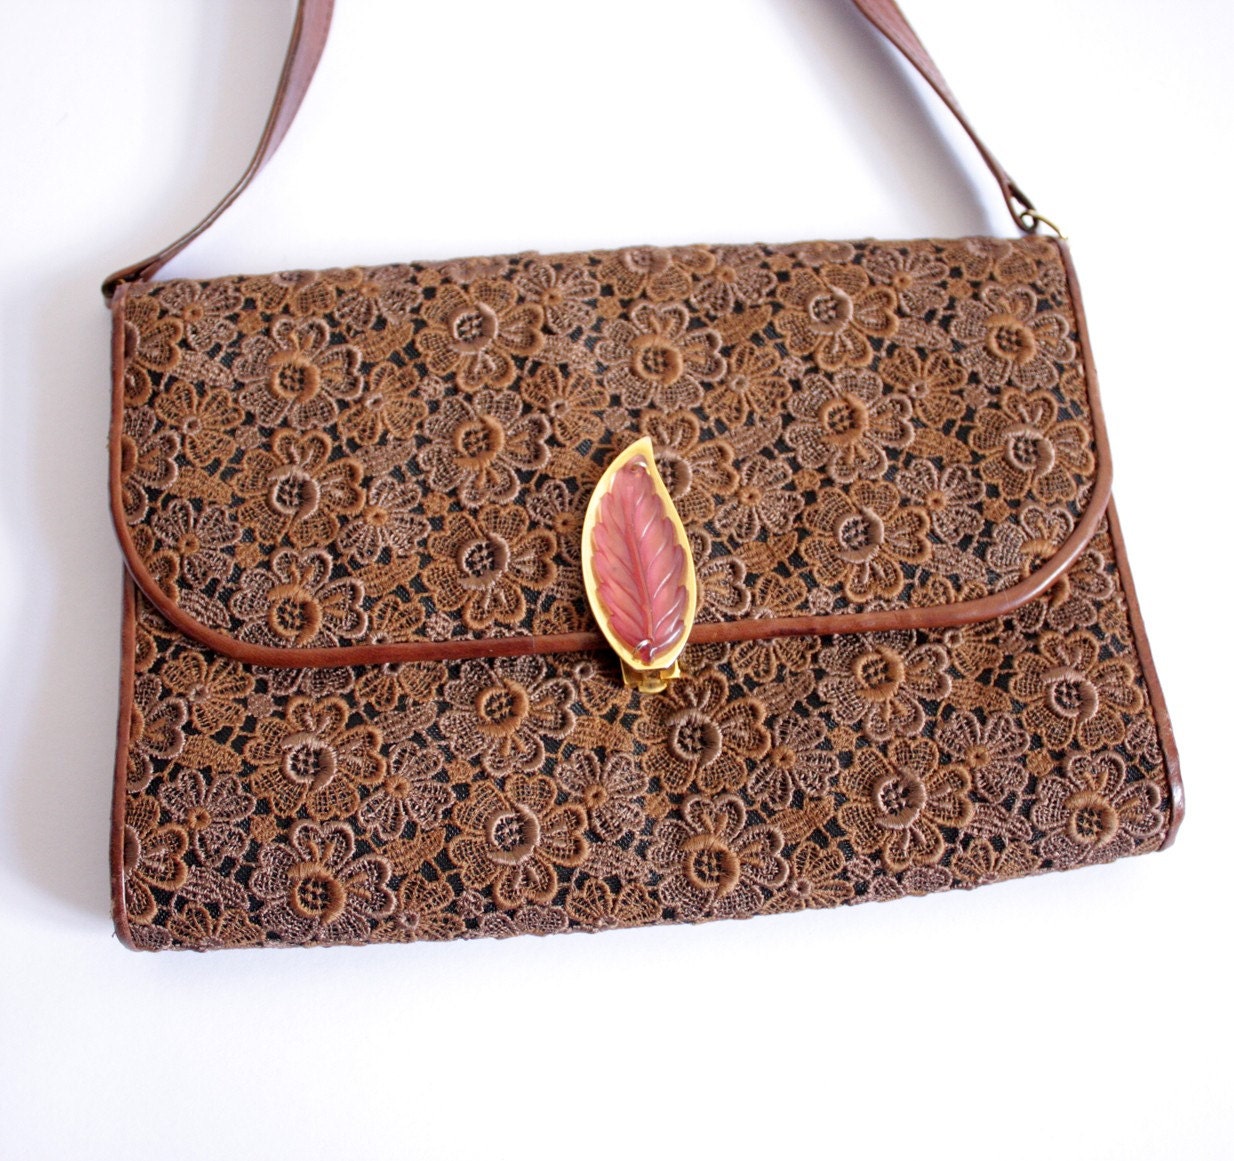 Vintage brown leather and crochet Purse Bag